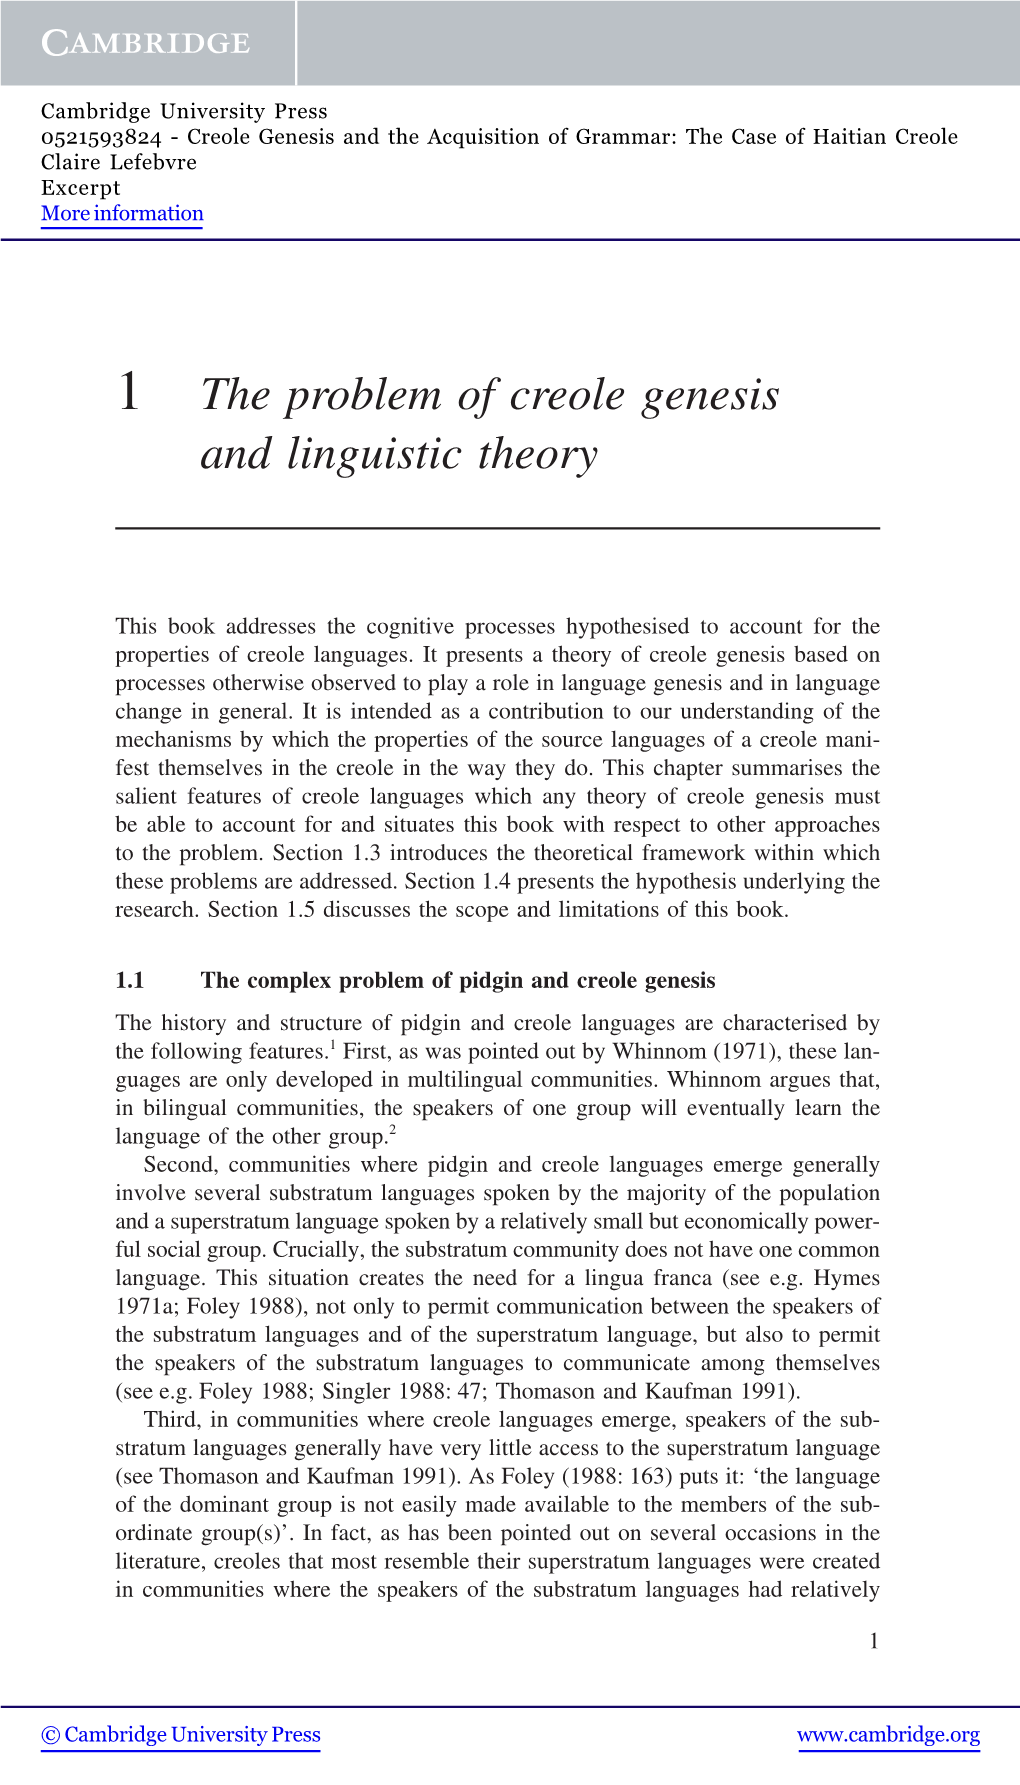 1 the Problem of Creole Genesis and Linguistic Theory